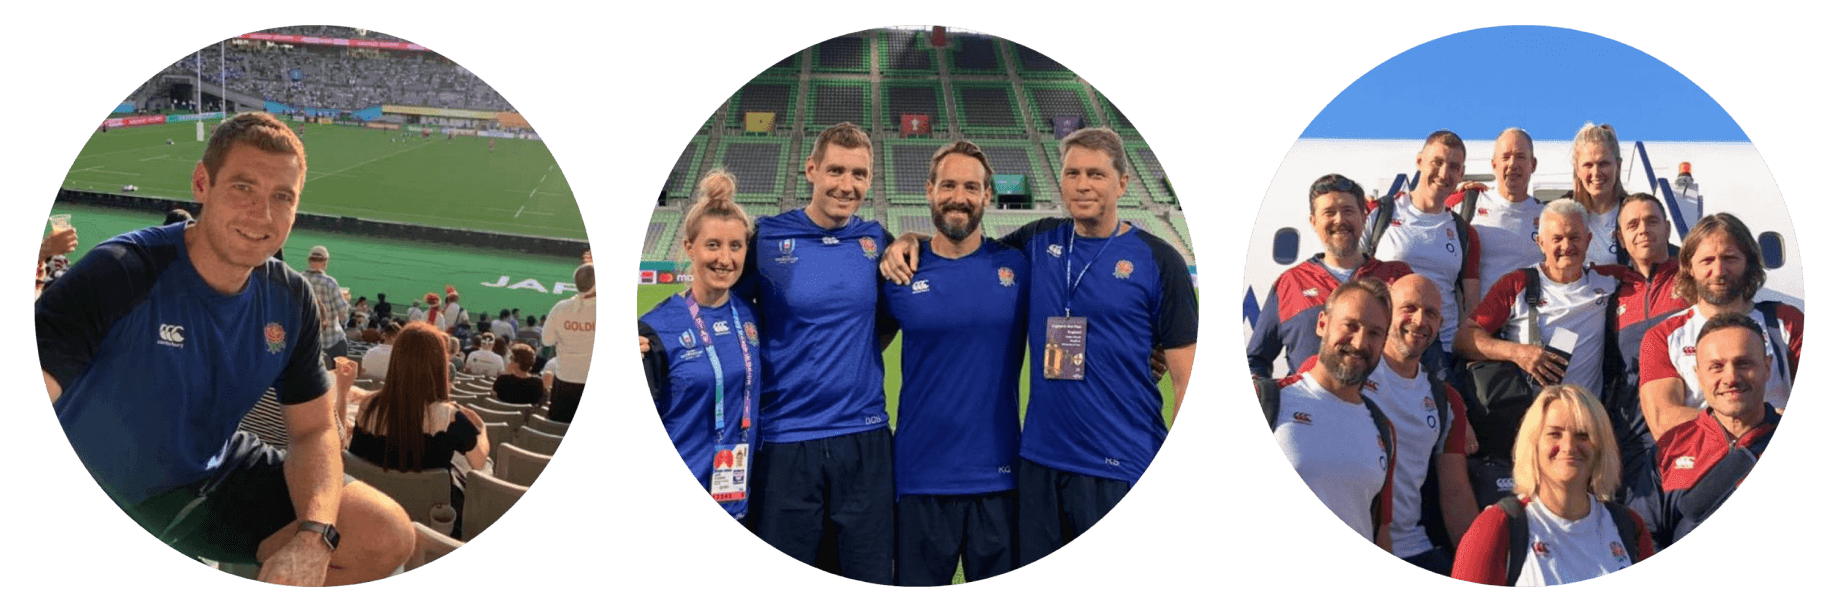 Dave O’Sullivan, Private Practice And Sports Physiotherapist at World Cup